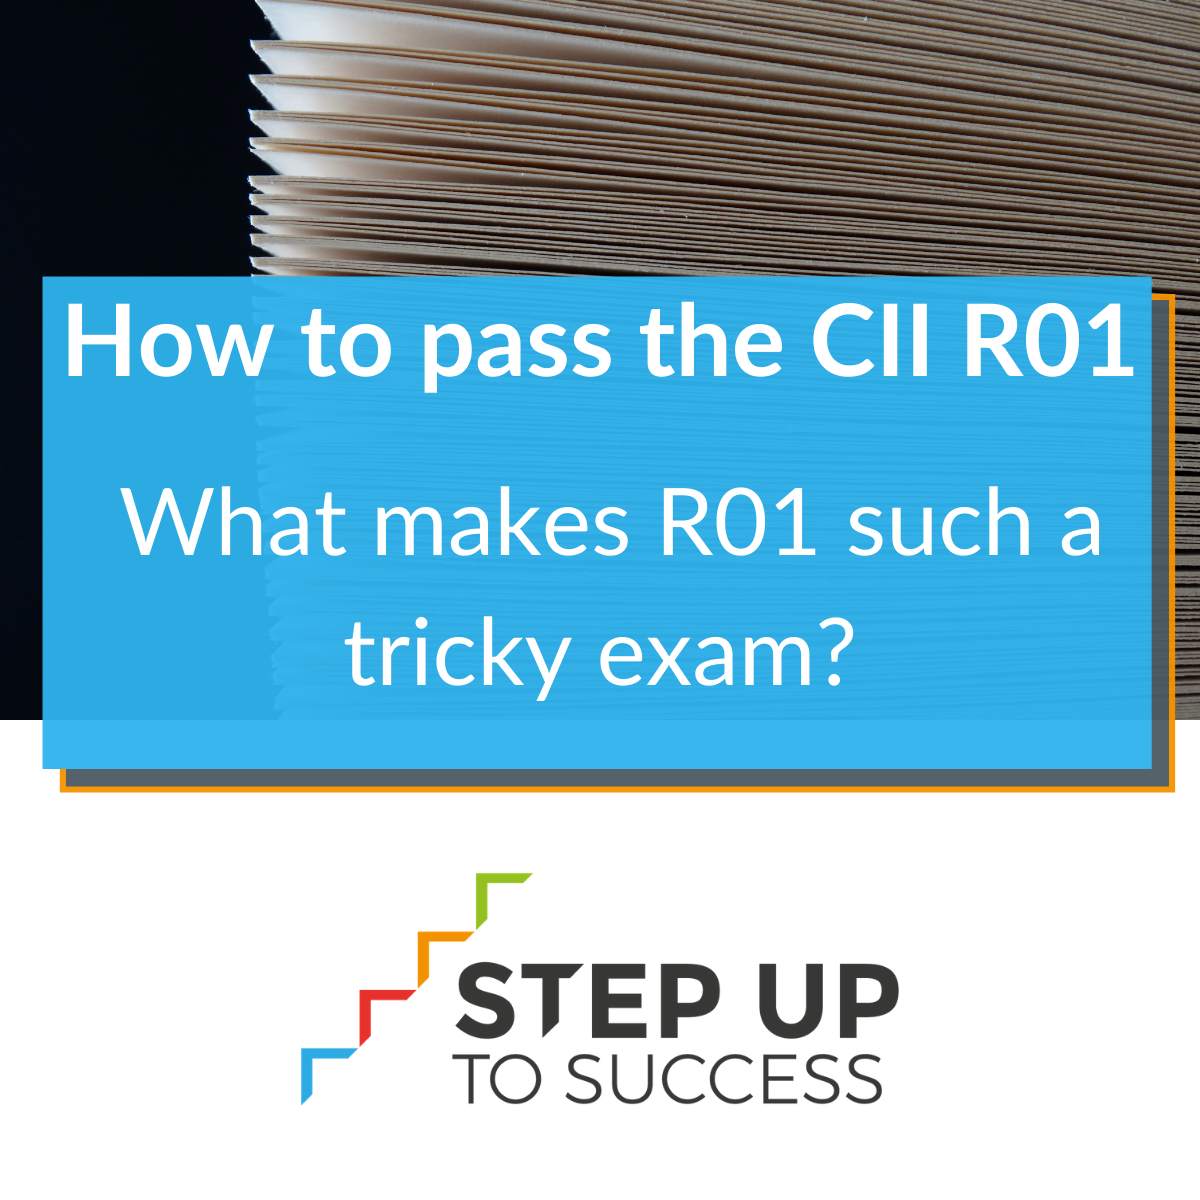 How to pass the CII R01